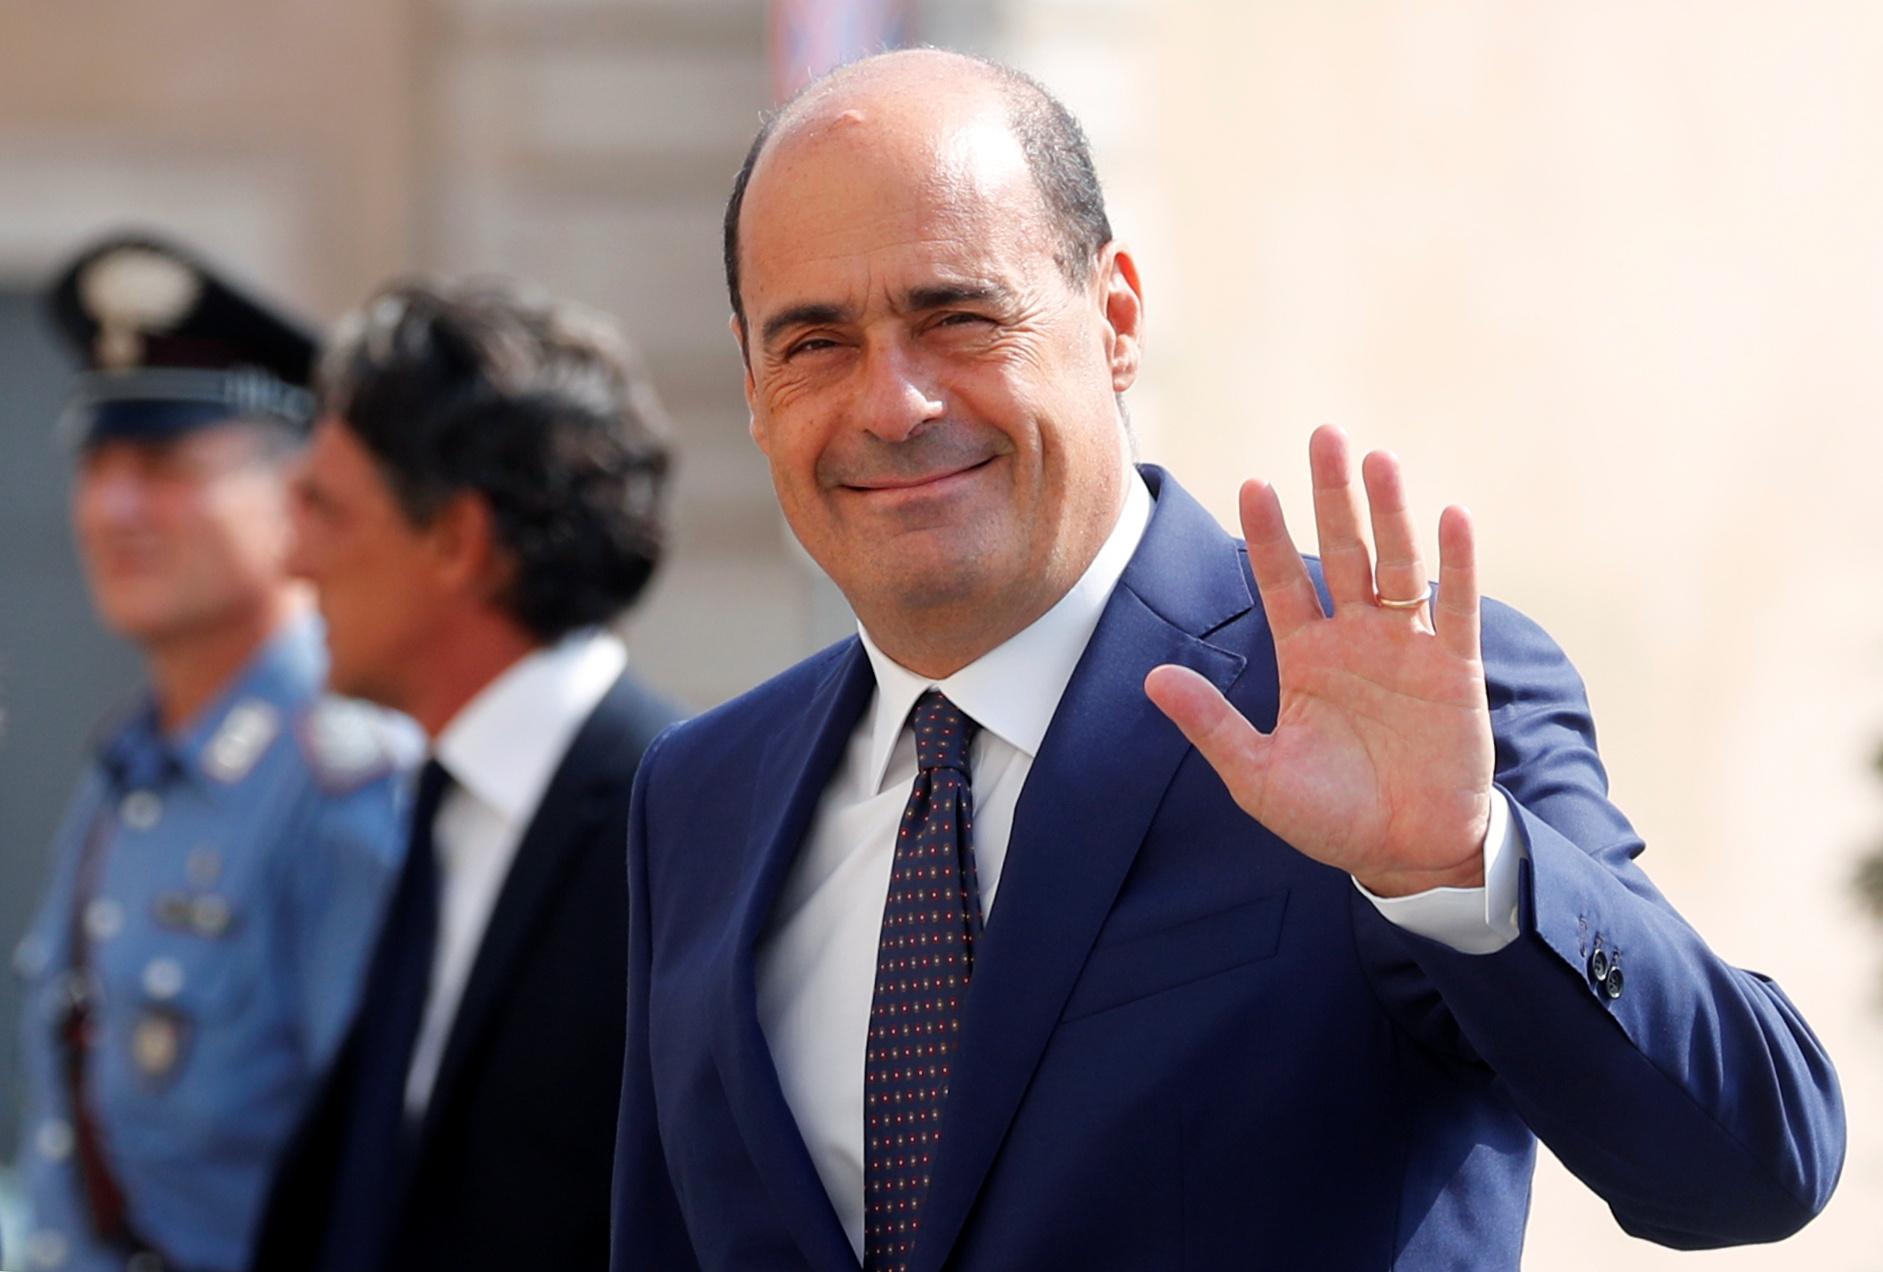 Democratic Party leader Nicola Zingaretti waves as he walks into the Presidential Palace for consultations with Italian President Sergio Mattarella in Rome, Italy, August 28, 2019. REUTERS/Remo Casilli